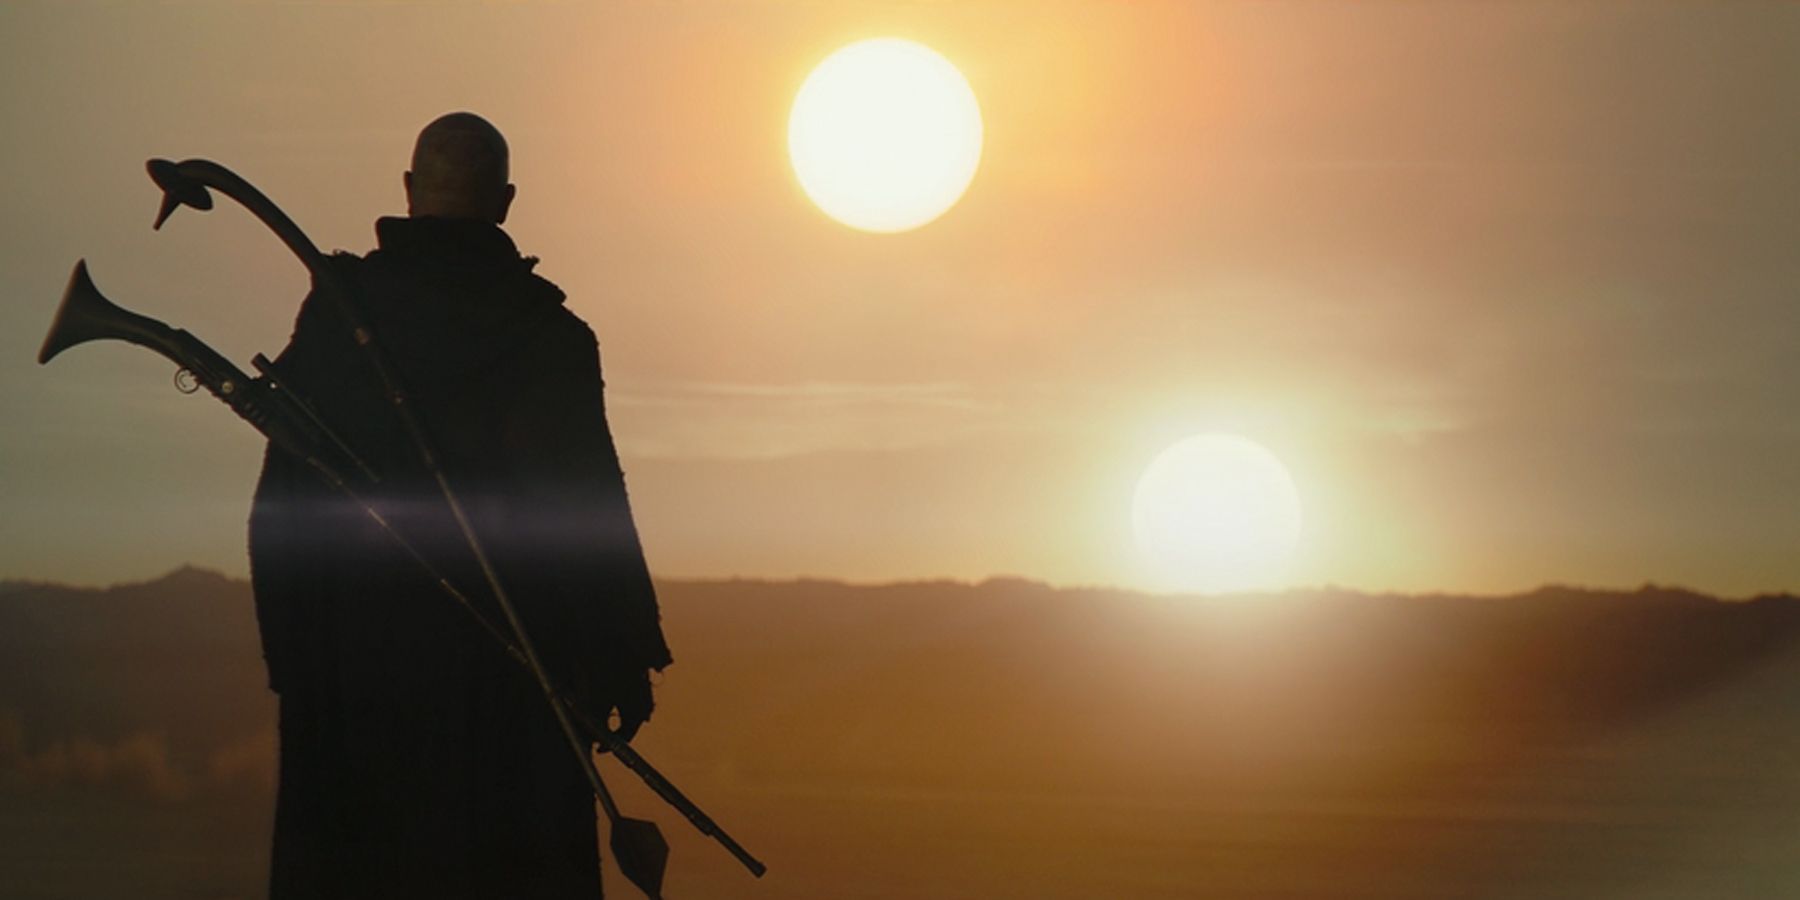 Boba Fett the Mandalorian Bounty Hunter, and clone of deceased Mandalorian Bounty Hunter Jango Fett, stands and watches the sunset on Tatooine.